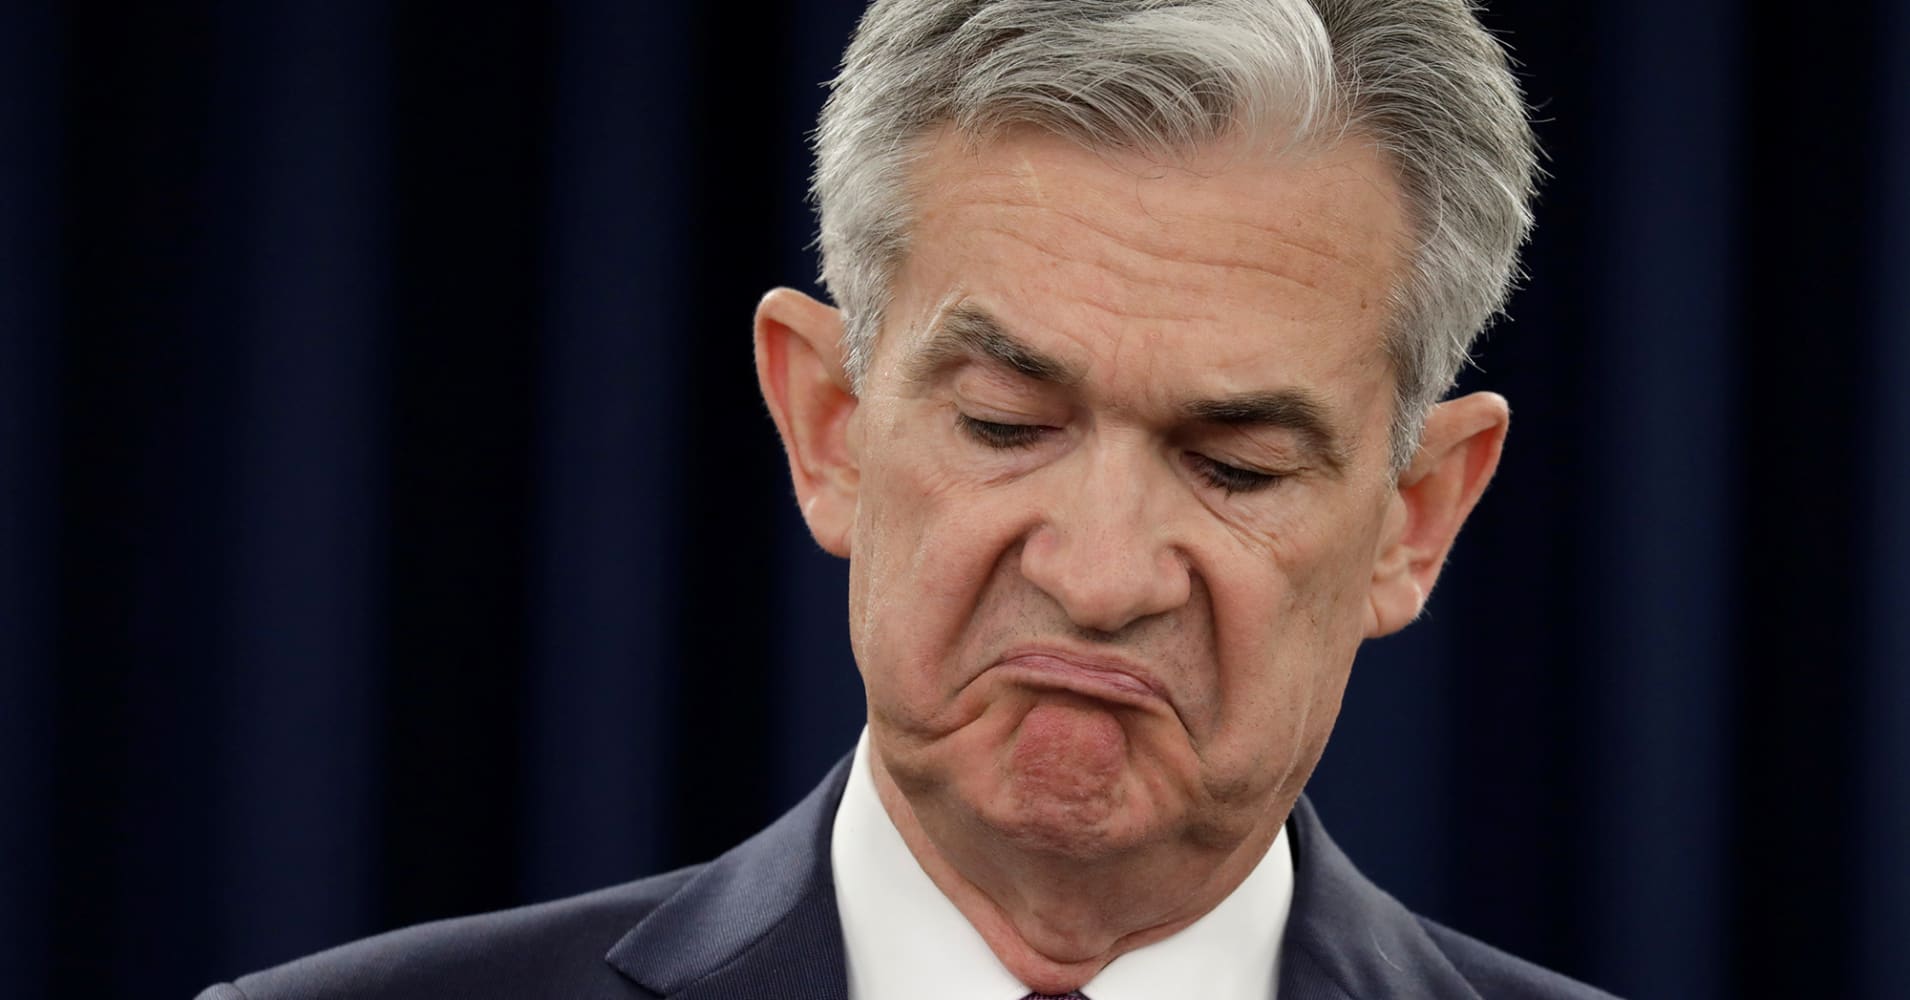 Fed Chairman Powell now sees current interest rate level 'just below' neutral